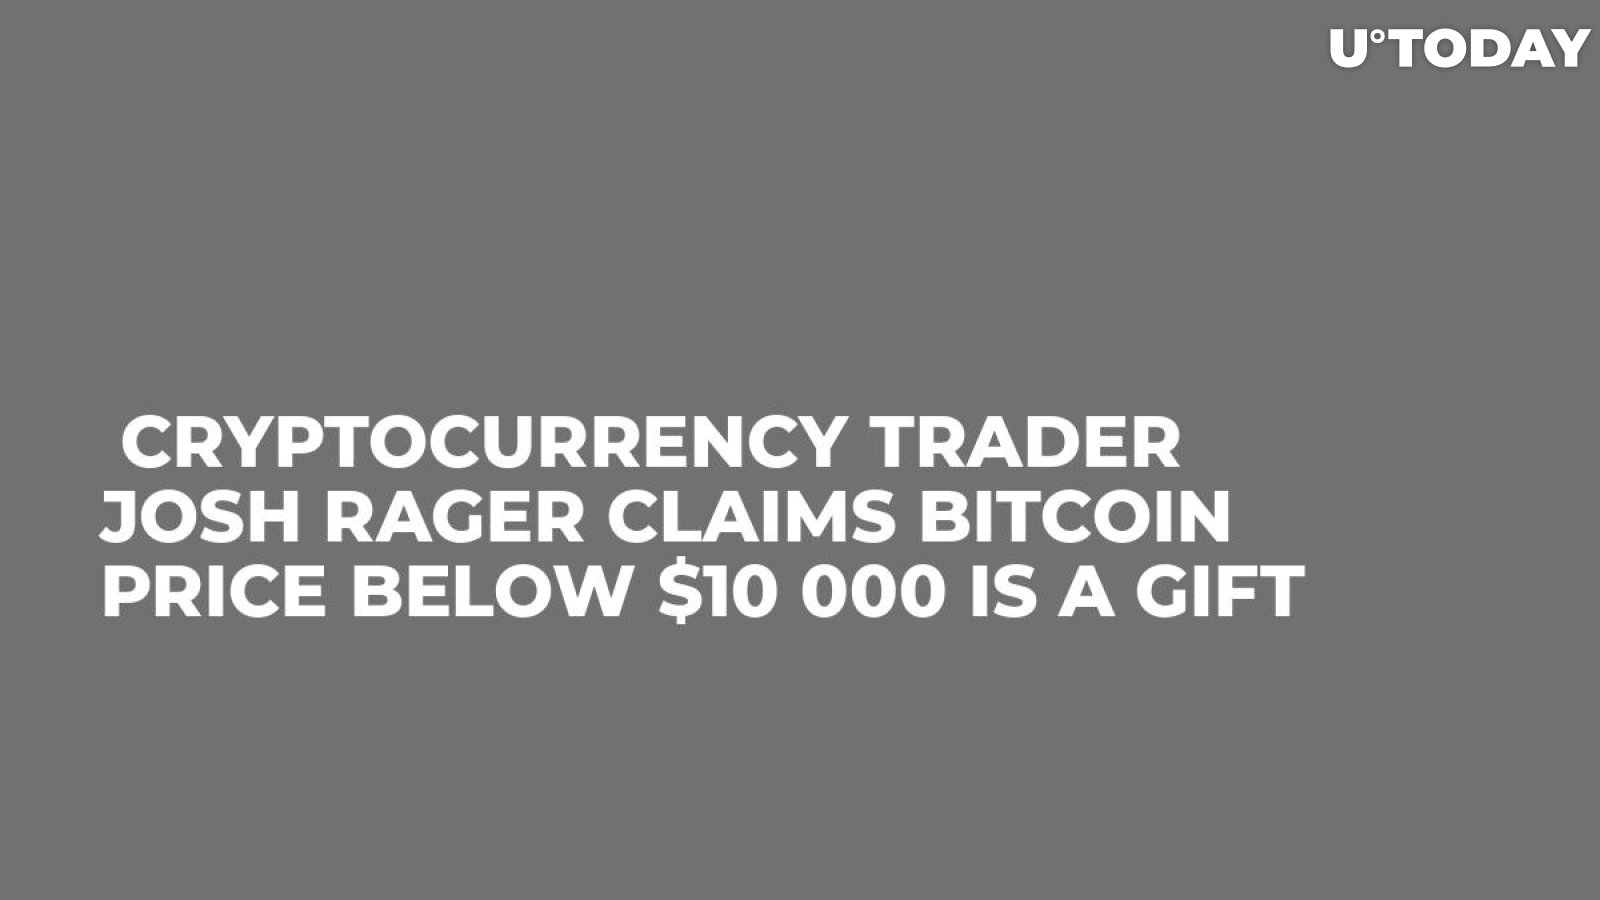  Cryptocurrency Trader Josh Rager Сlaims Bitcoin Price Below $10 000 is a Gift